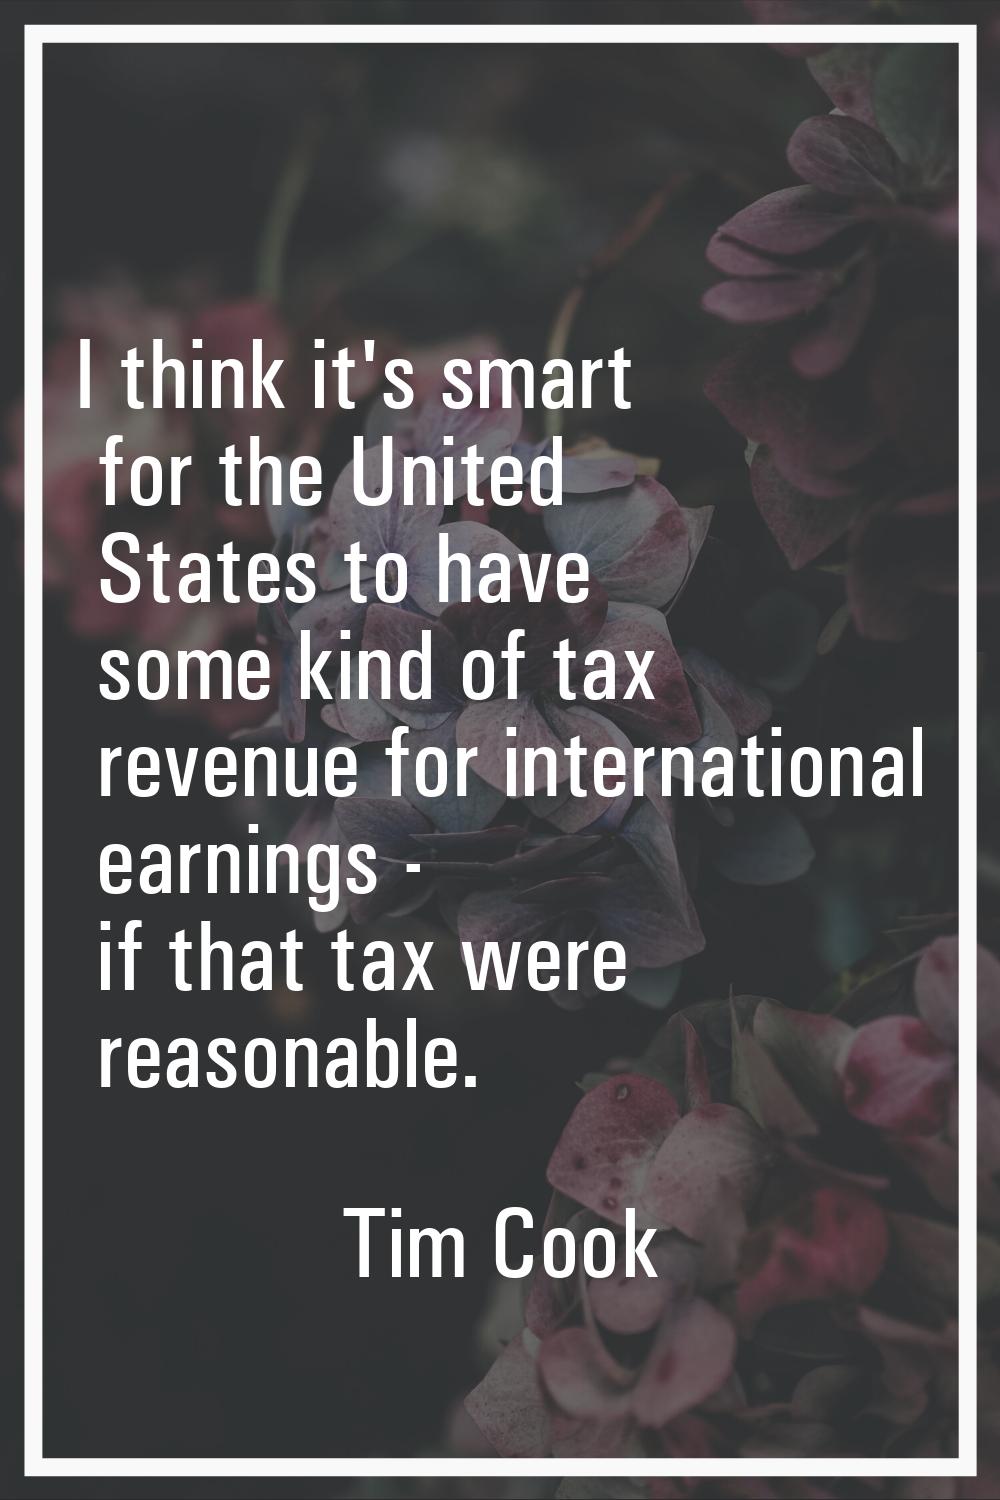 I think it's smart for the United States to have some kind of tax revenue for international earning